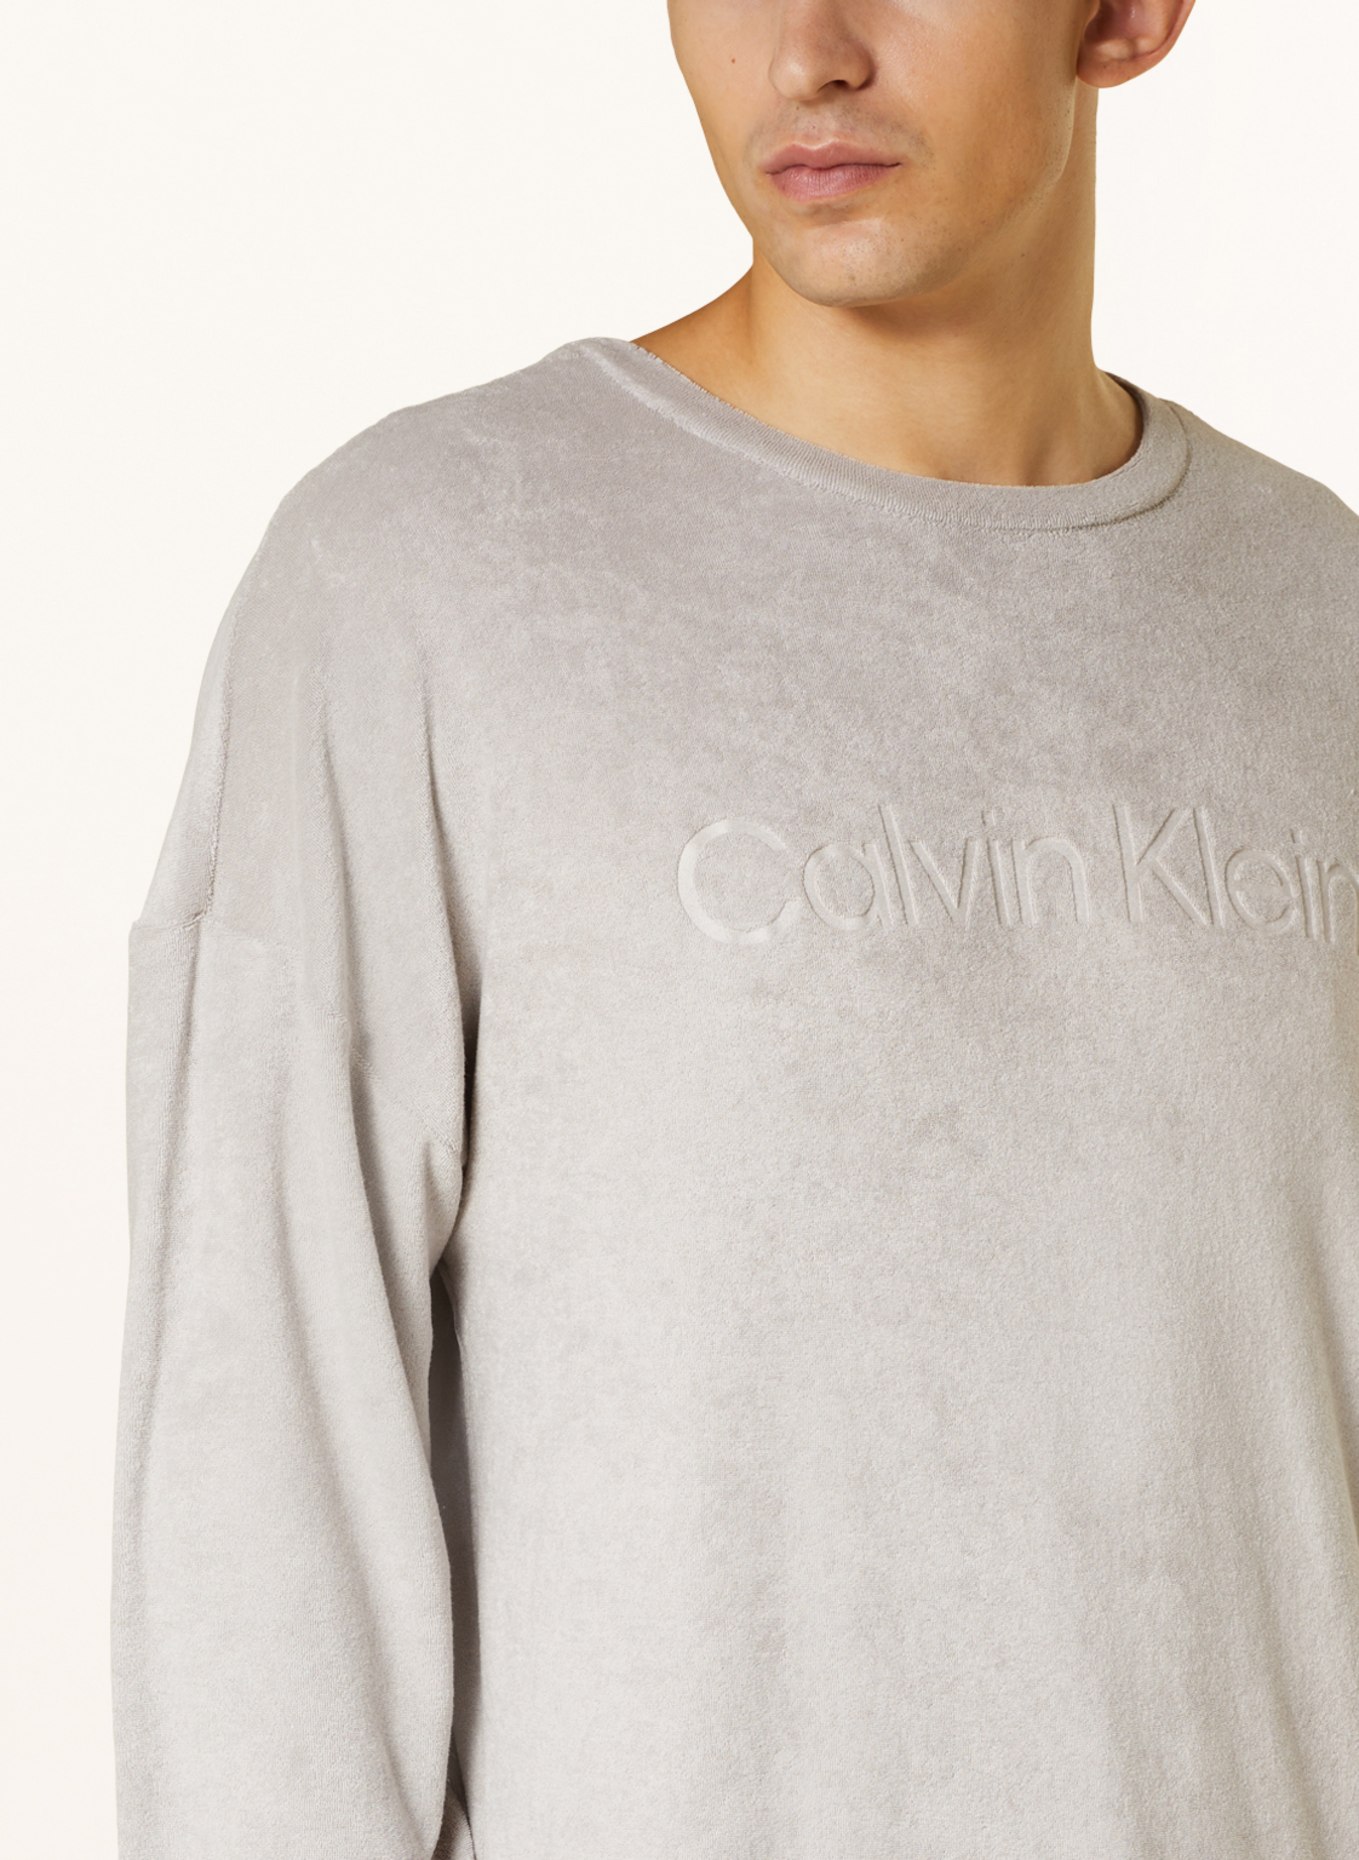 Calvin Klein Lounge shirt made of terry cloth, Color: LIGHT GRAY (Image 4)